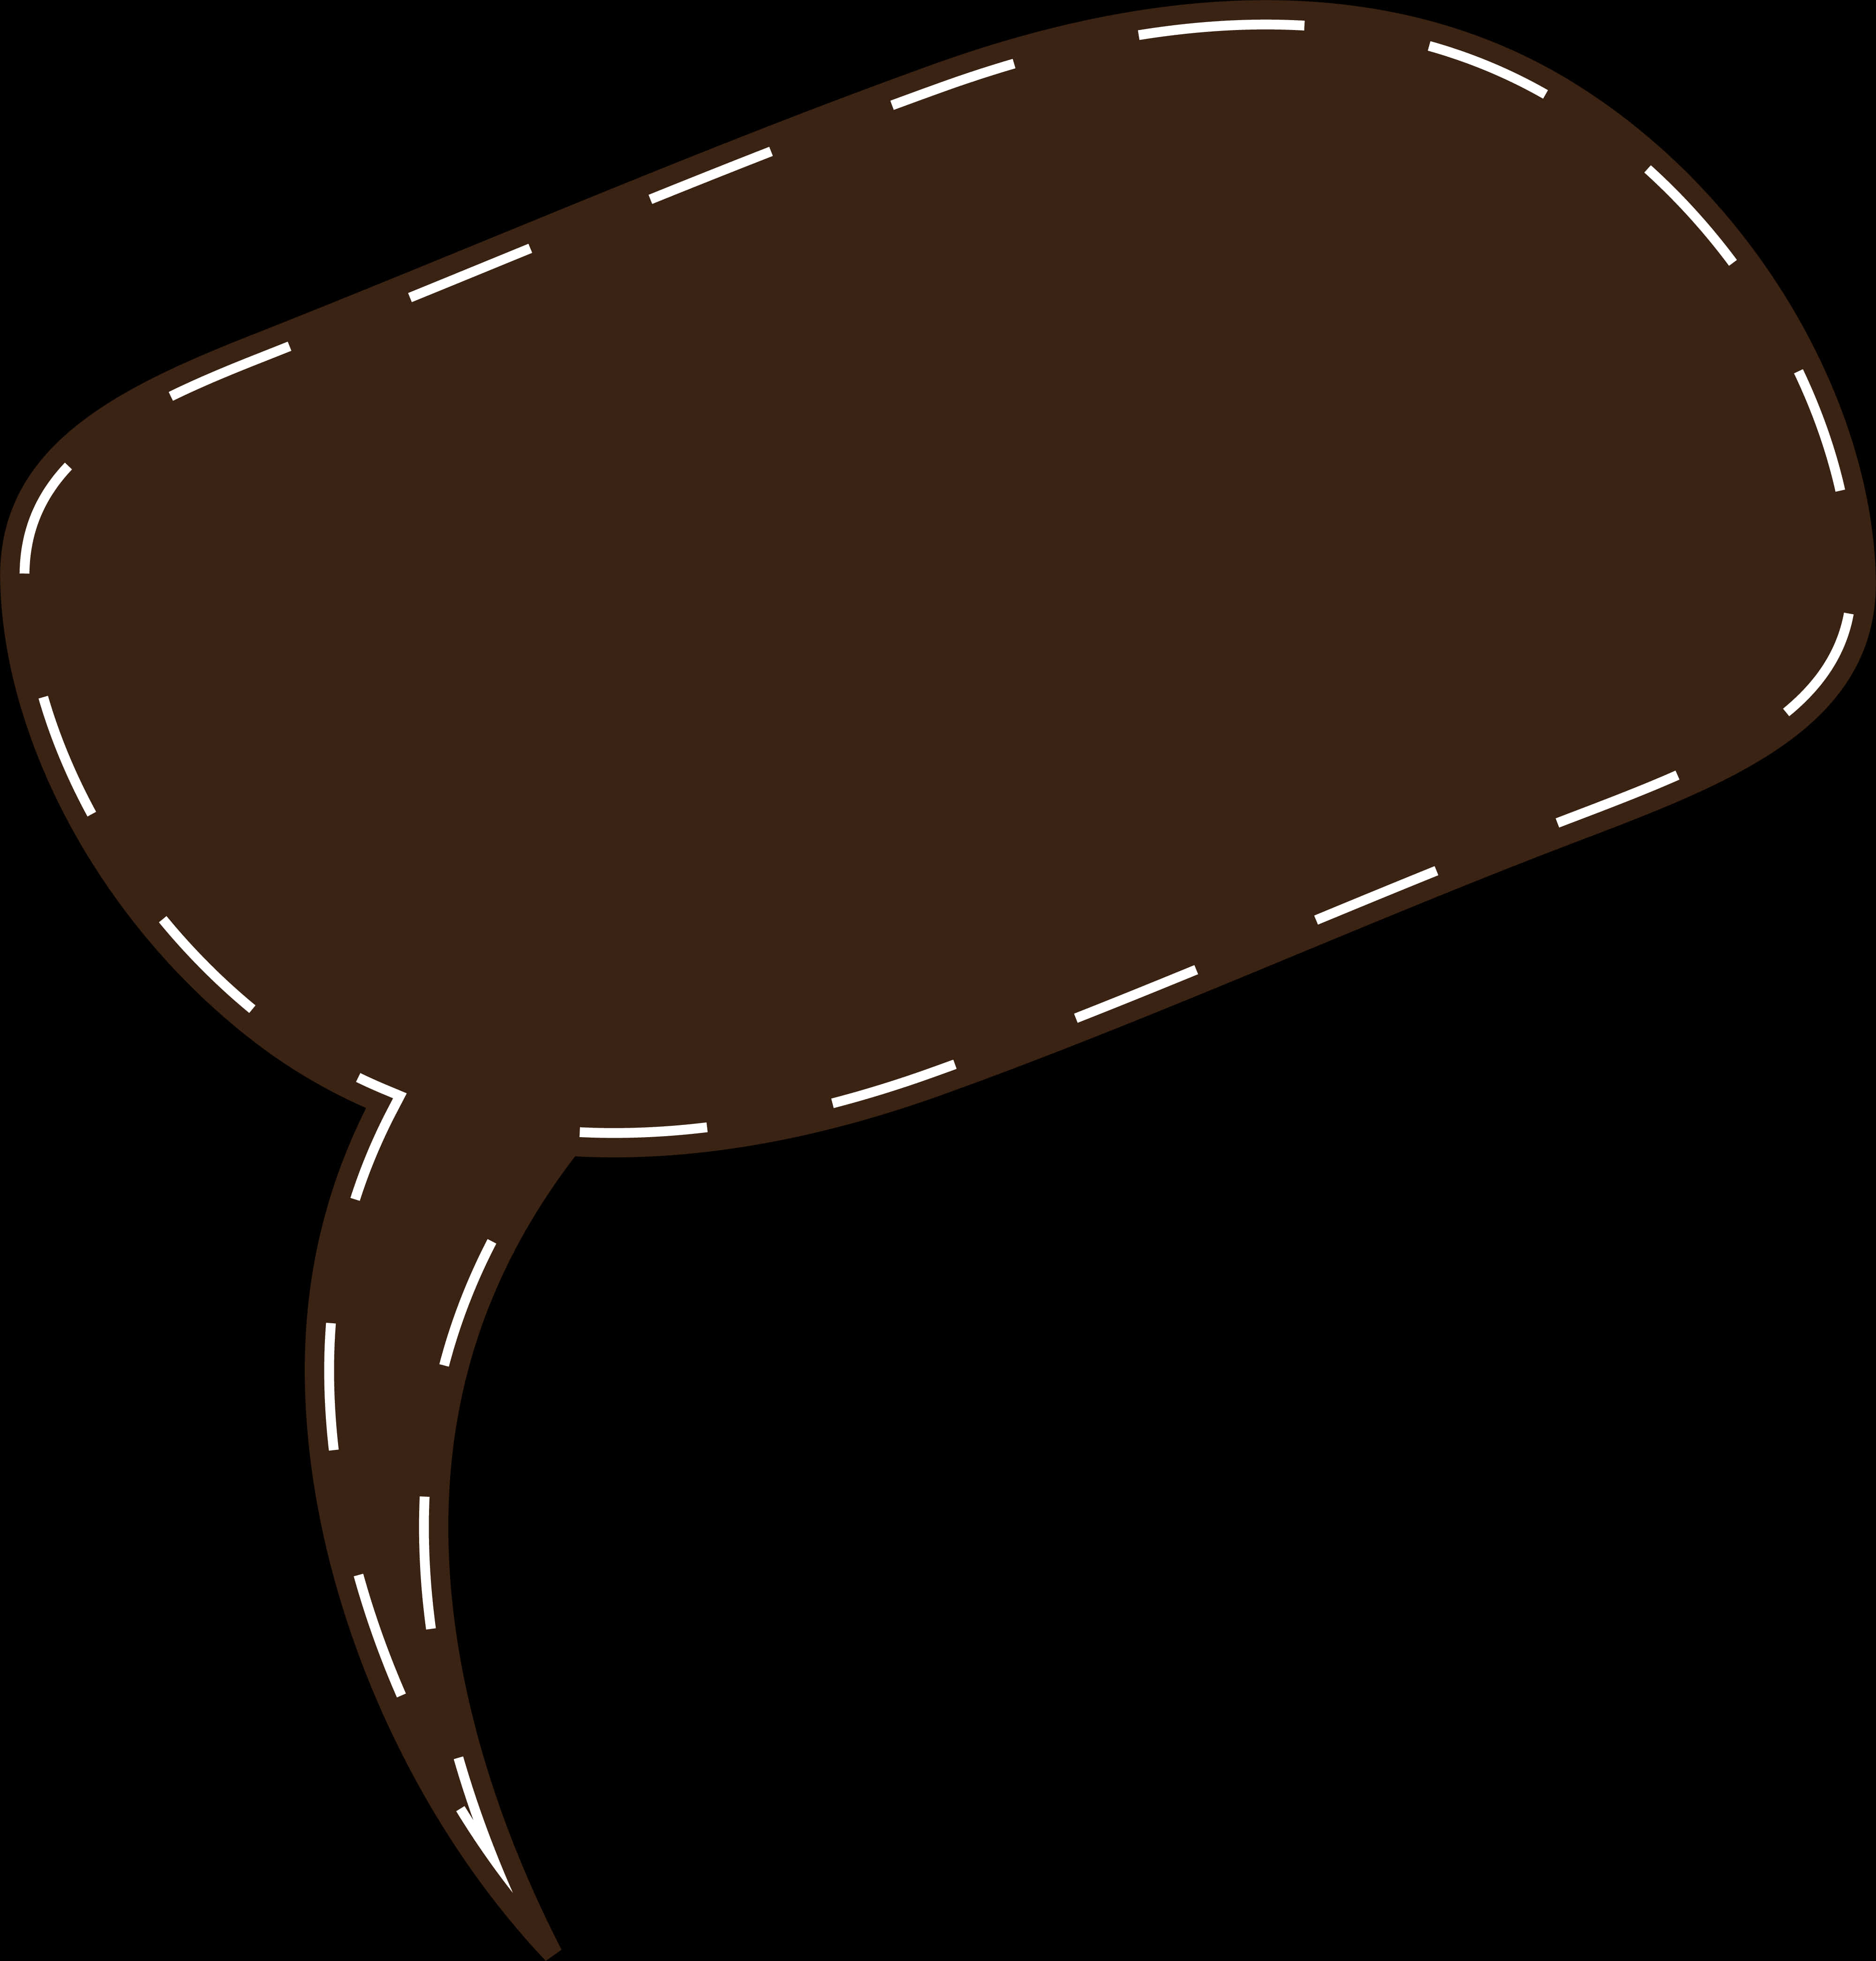 Cartoon Thought Bubble Graphic PNG image